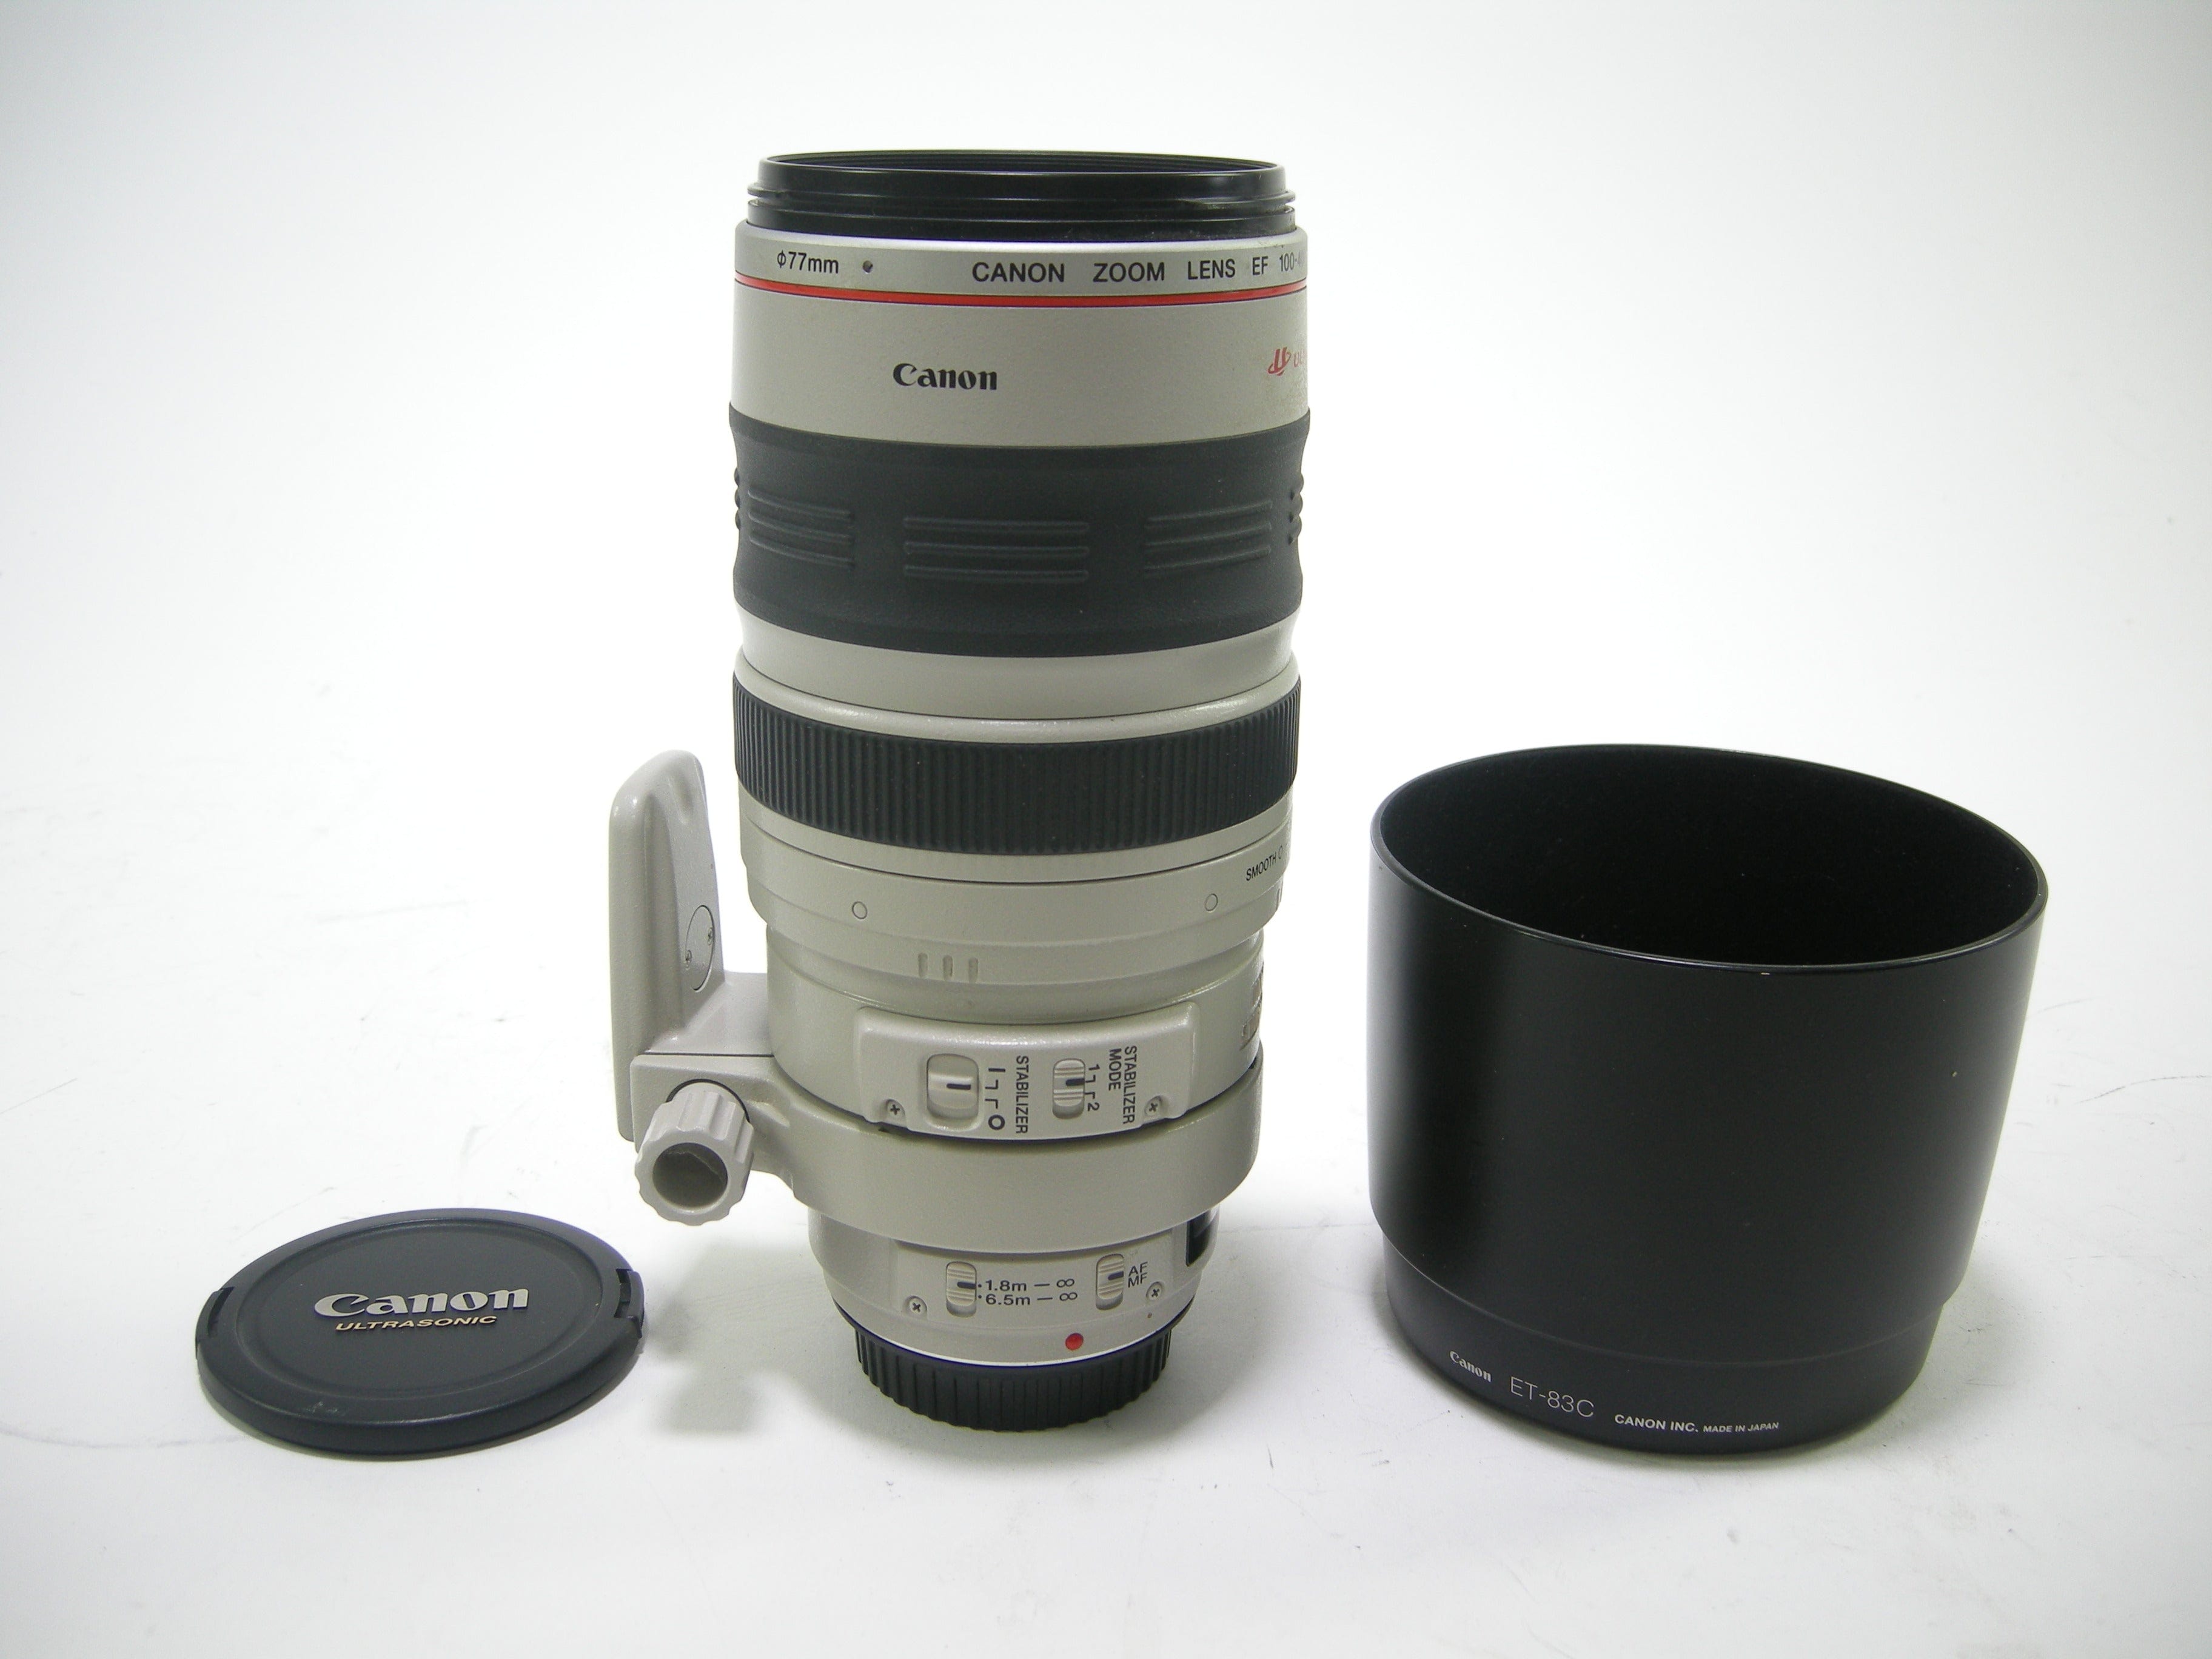 Canon Zoom EF 100-400mm f4.5-5.6 L IS